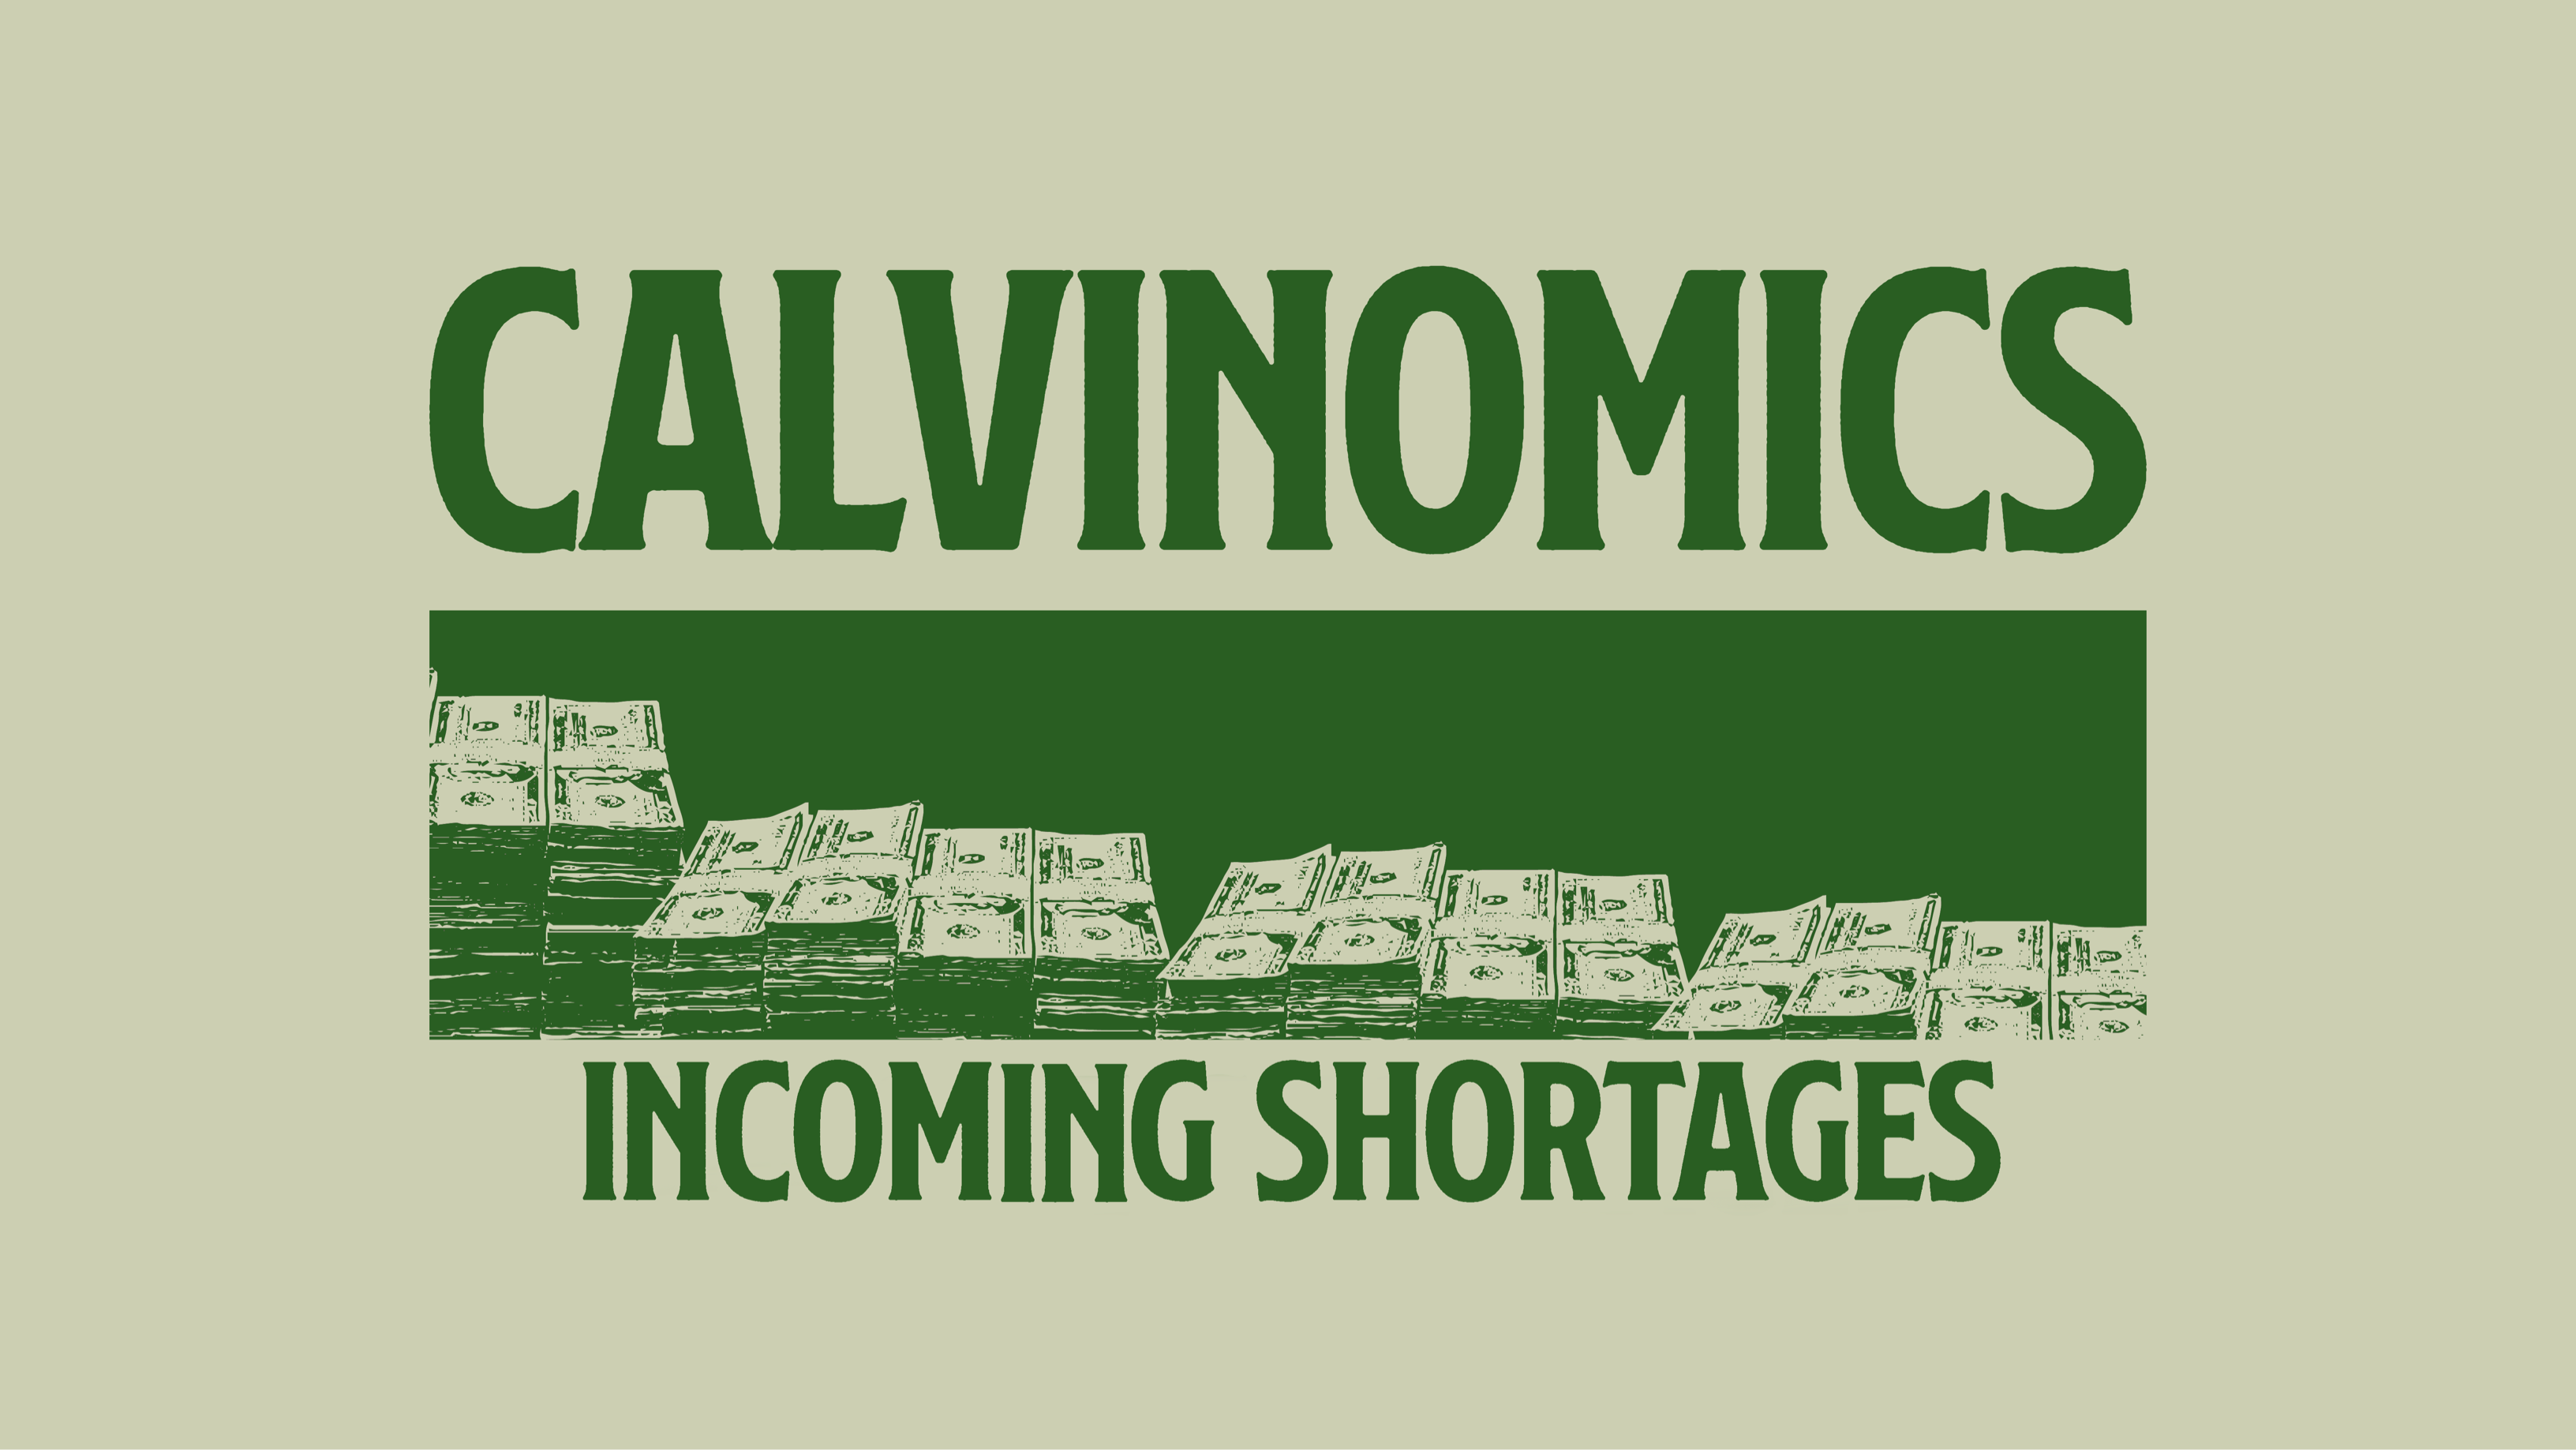 Green background with the text "Calvinomics Incoming Shortages"